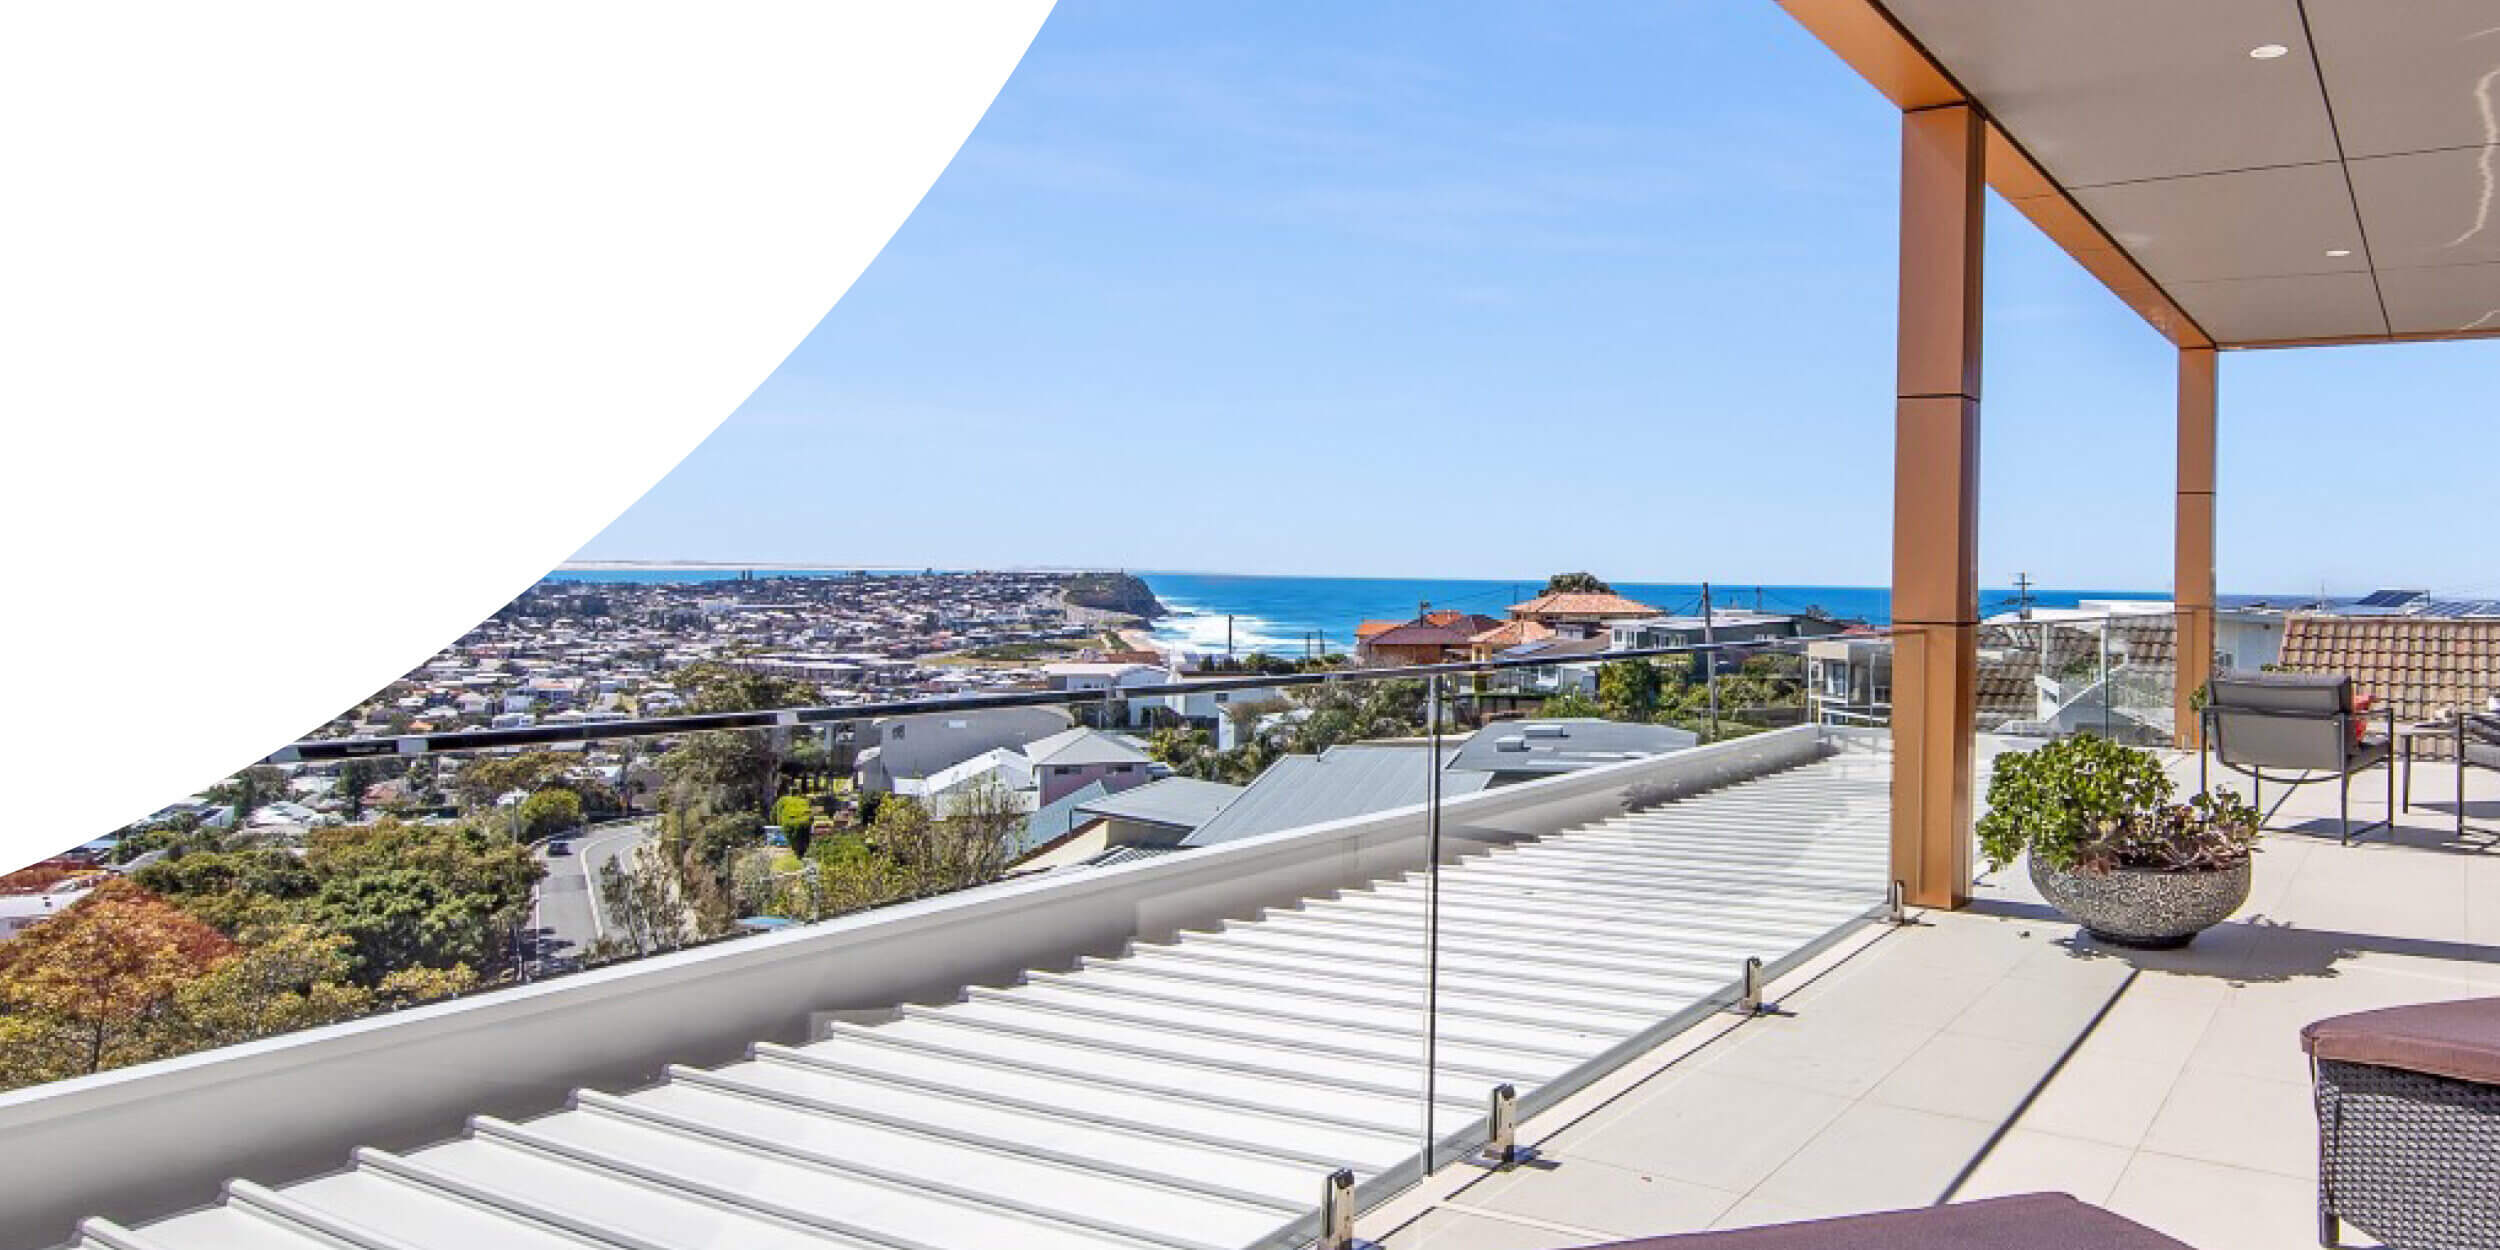 A spacious balcony overlooking the scenic coastal town of Port Stephens with clear skies, featuring modern outdoor furniture and glass railing, providing an unobstructed view of the blue ocean and surrounding houses.